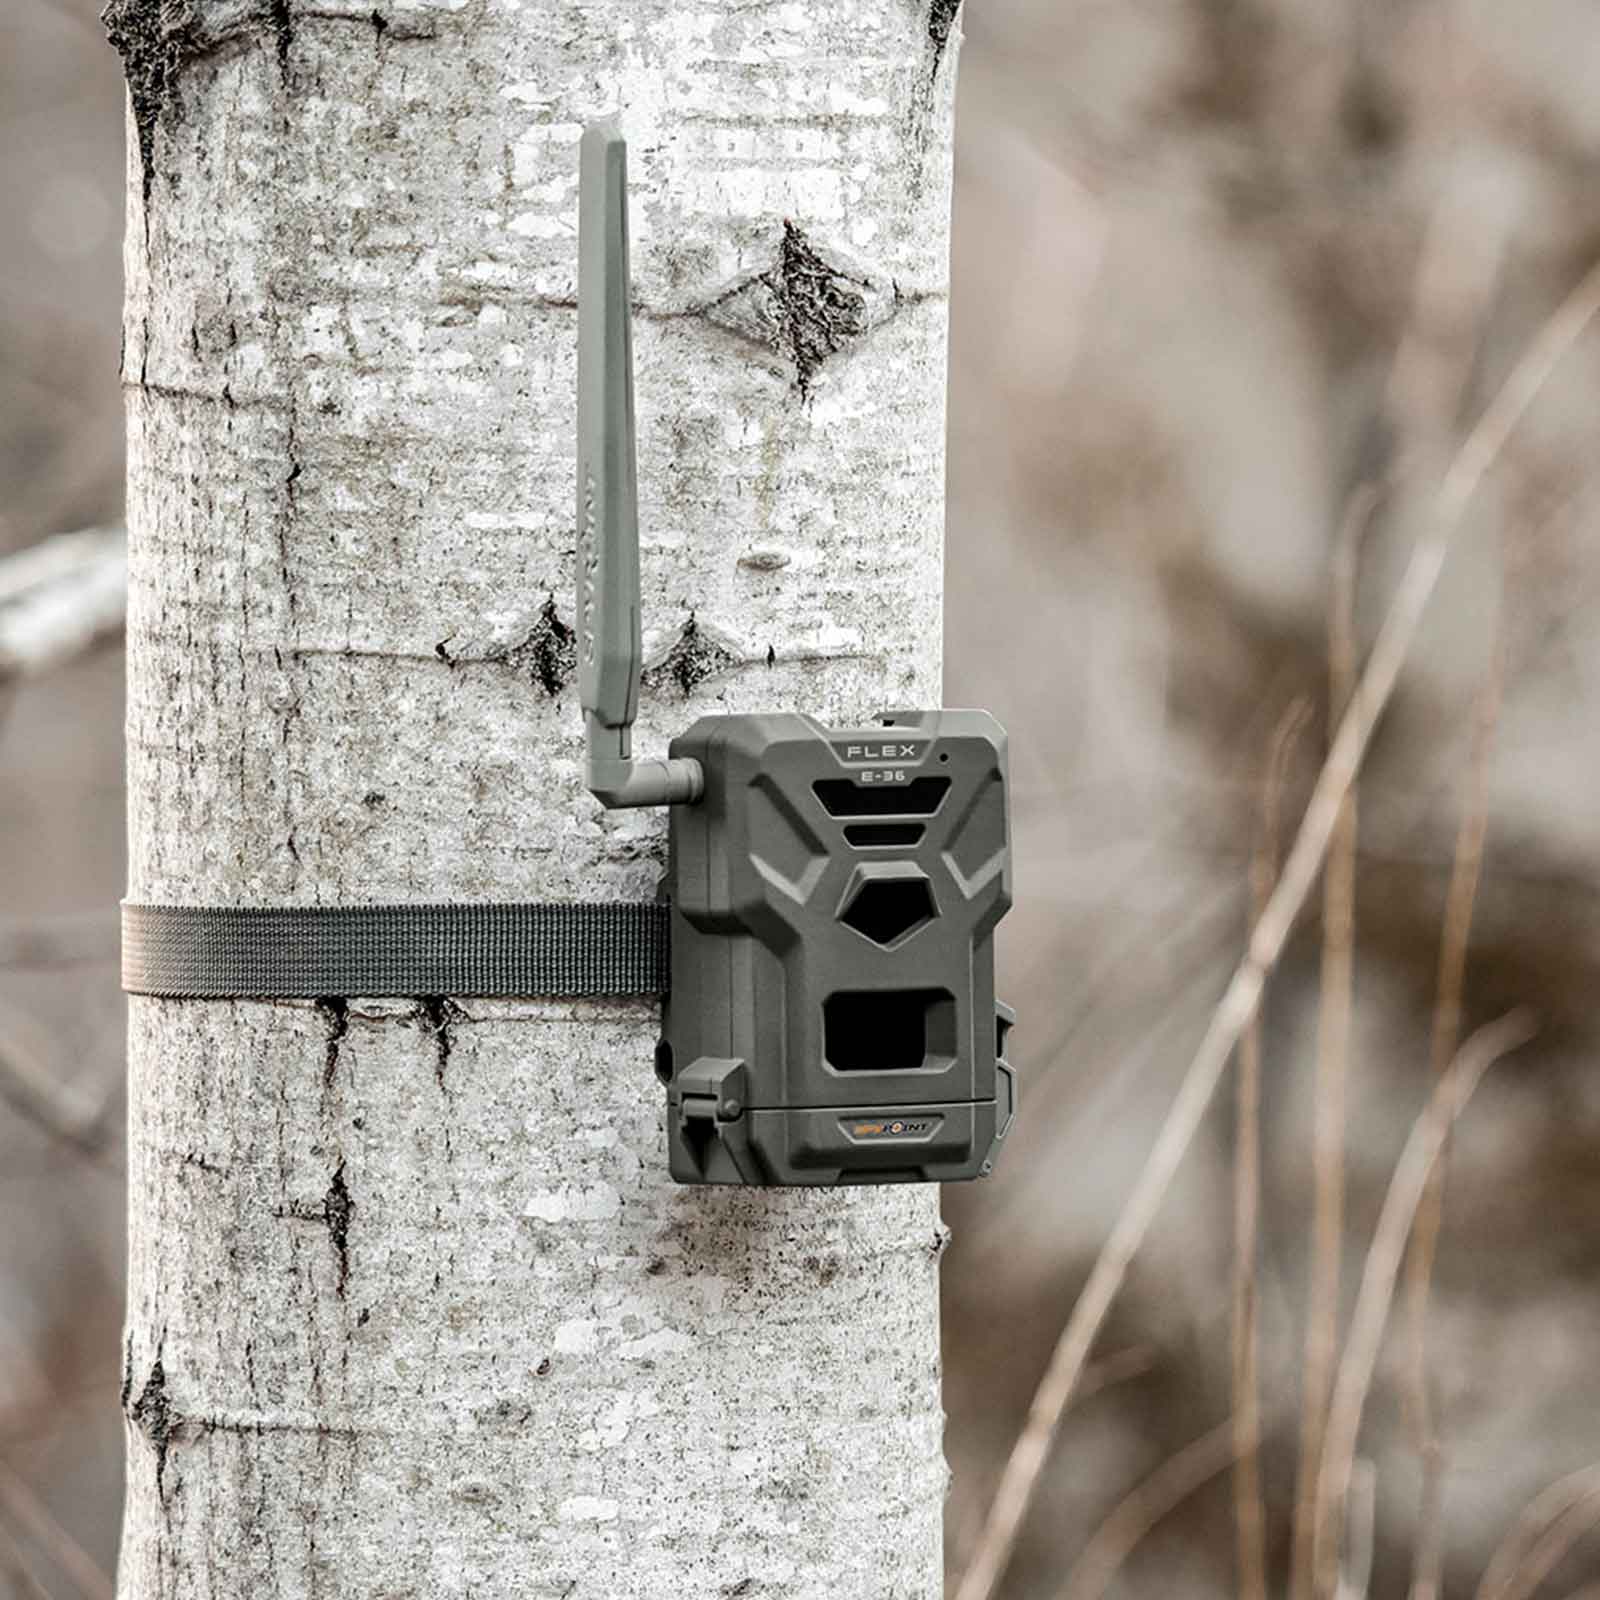 Spypoint Flex E-36 Trail Camera Twin-Pack